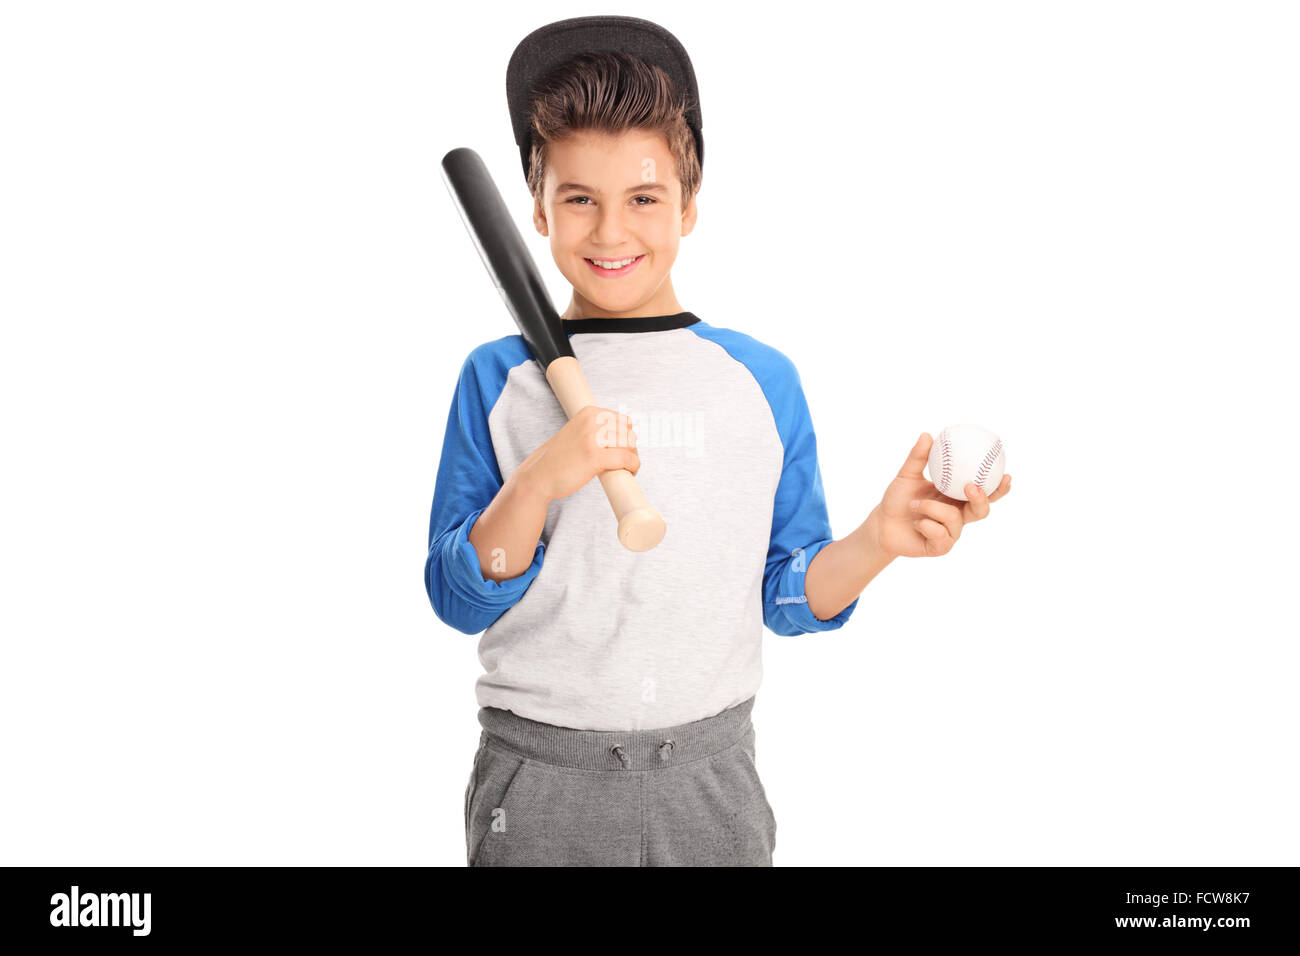 Cheerful kid holding a baseball bat and a baseball isolated on white background Stock Photo